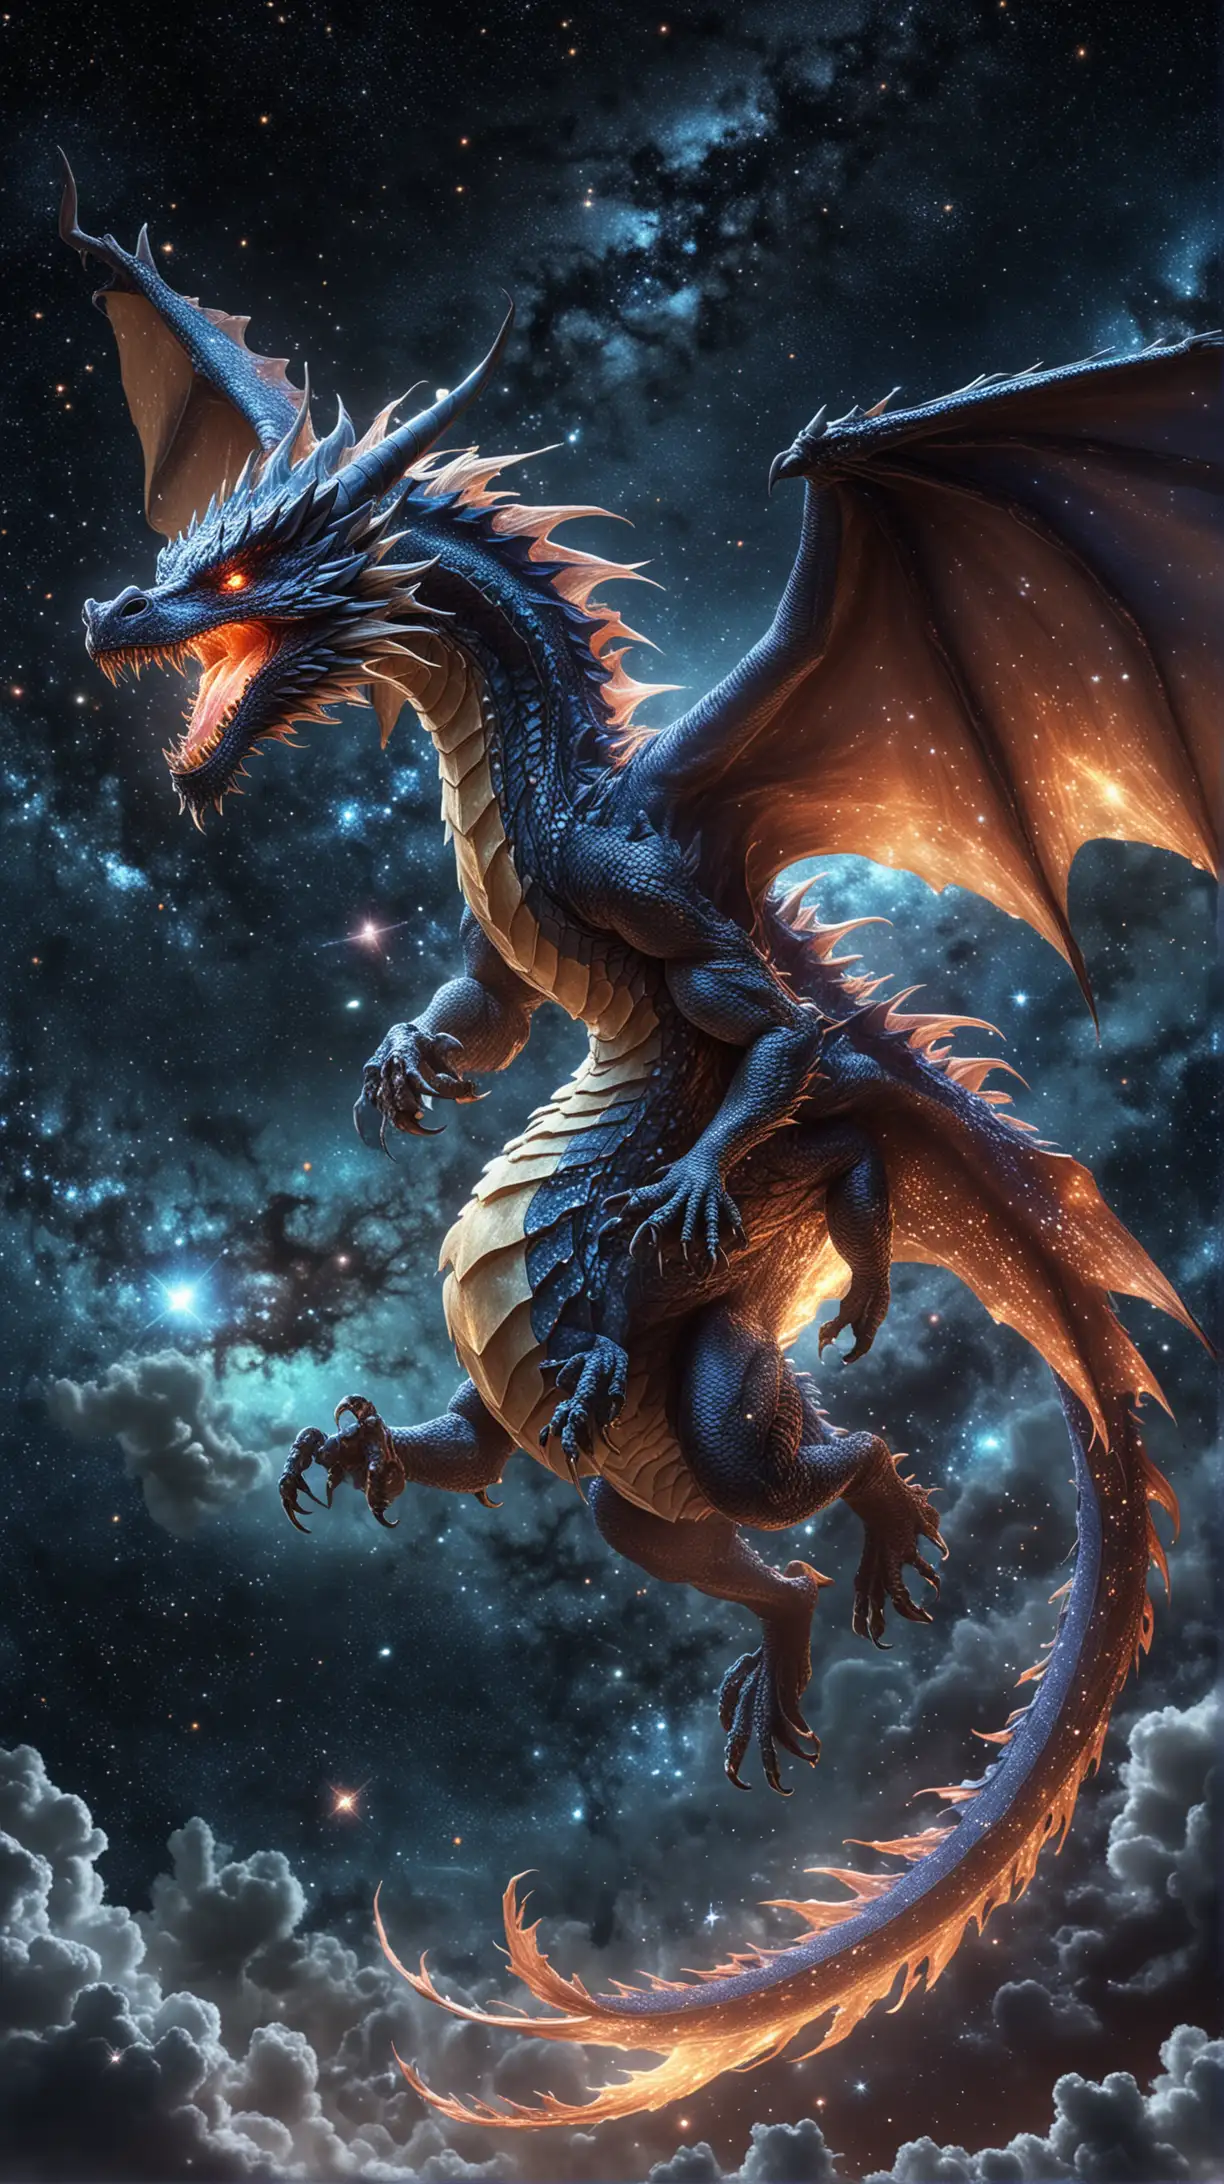 A majestic dragon soaring through the starlit sky, its scales shimmering like galaxies. It commands the cosmos, manipulating the stars and planets with celestial power.A majestic dragon soaring through the starlit sky, its scales shimmering like galaxies. It commands the cosmos, manipulating the stars and planets with celestial power.